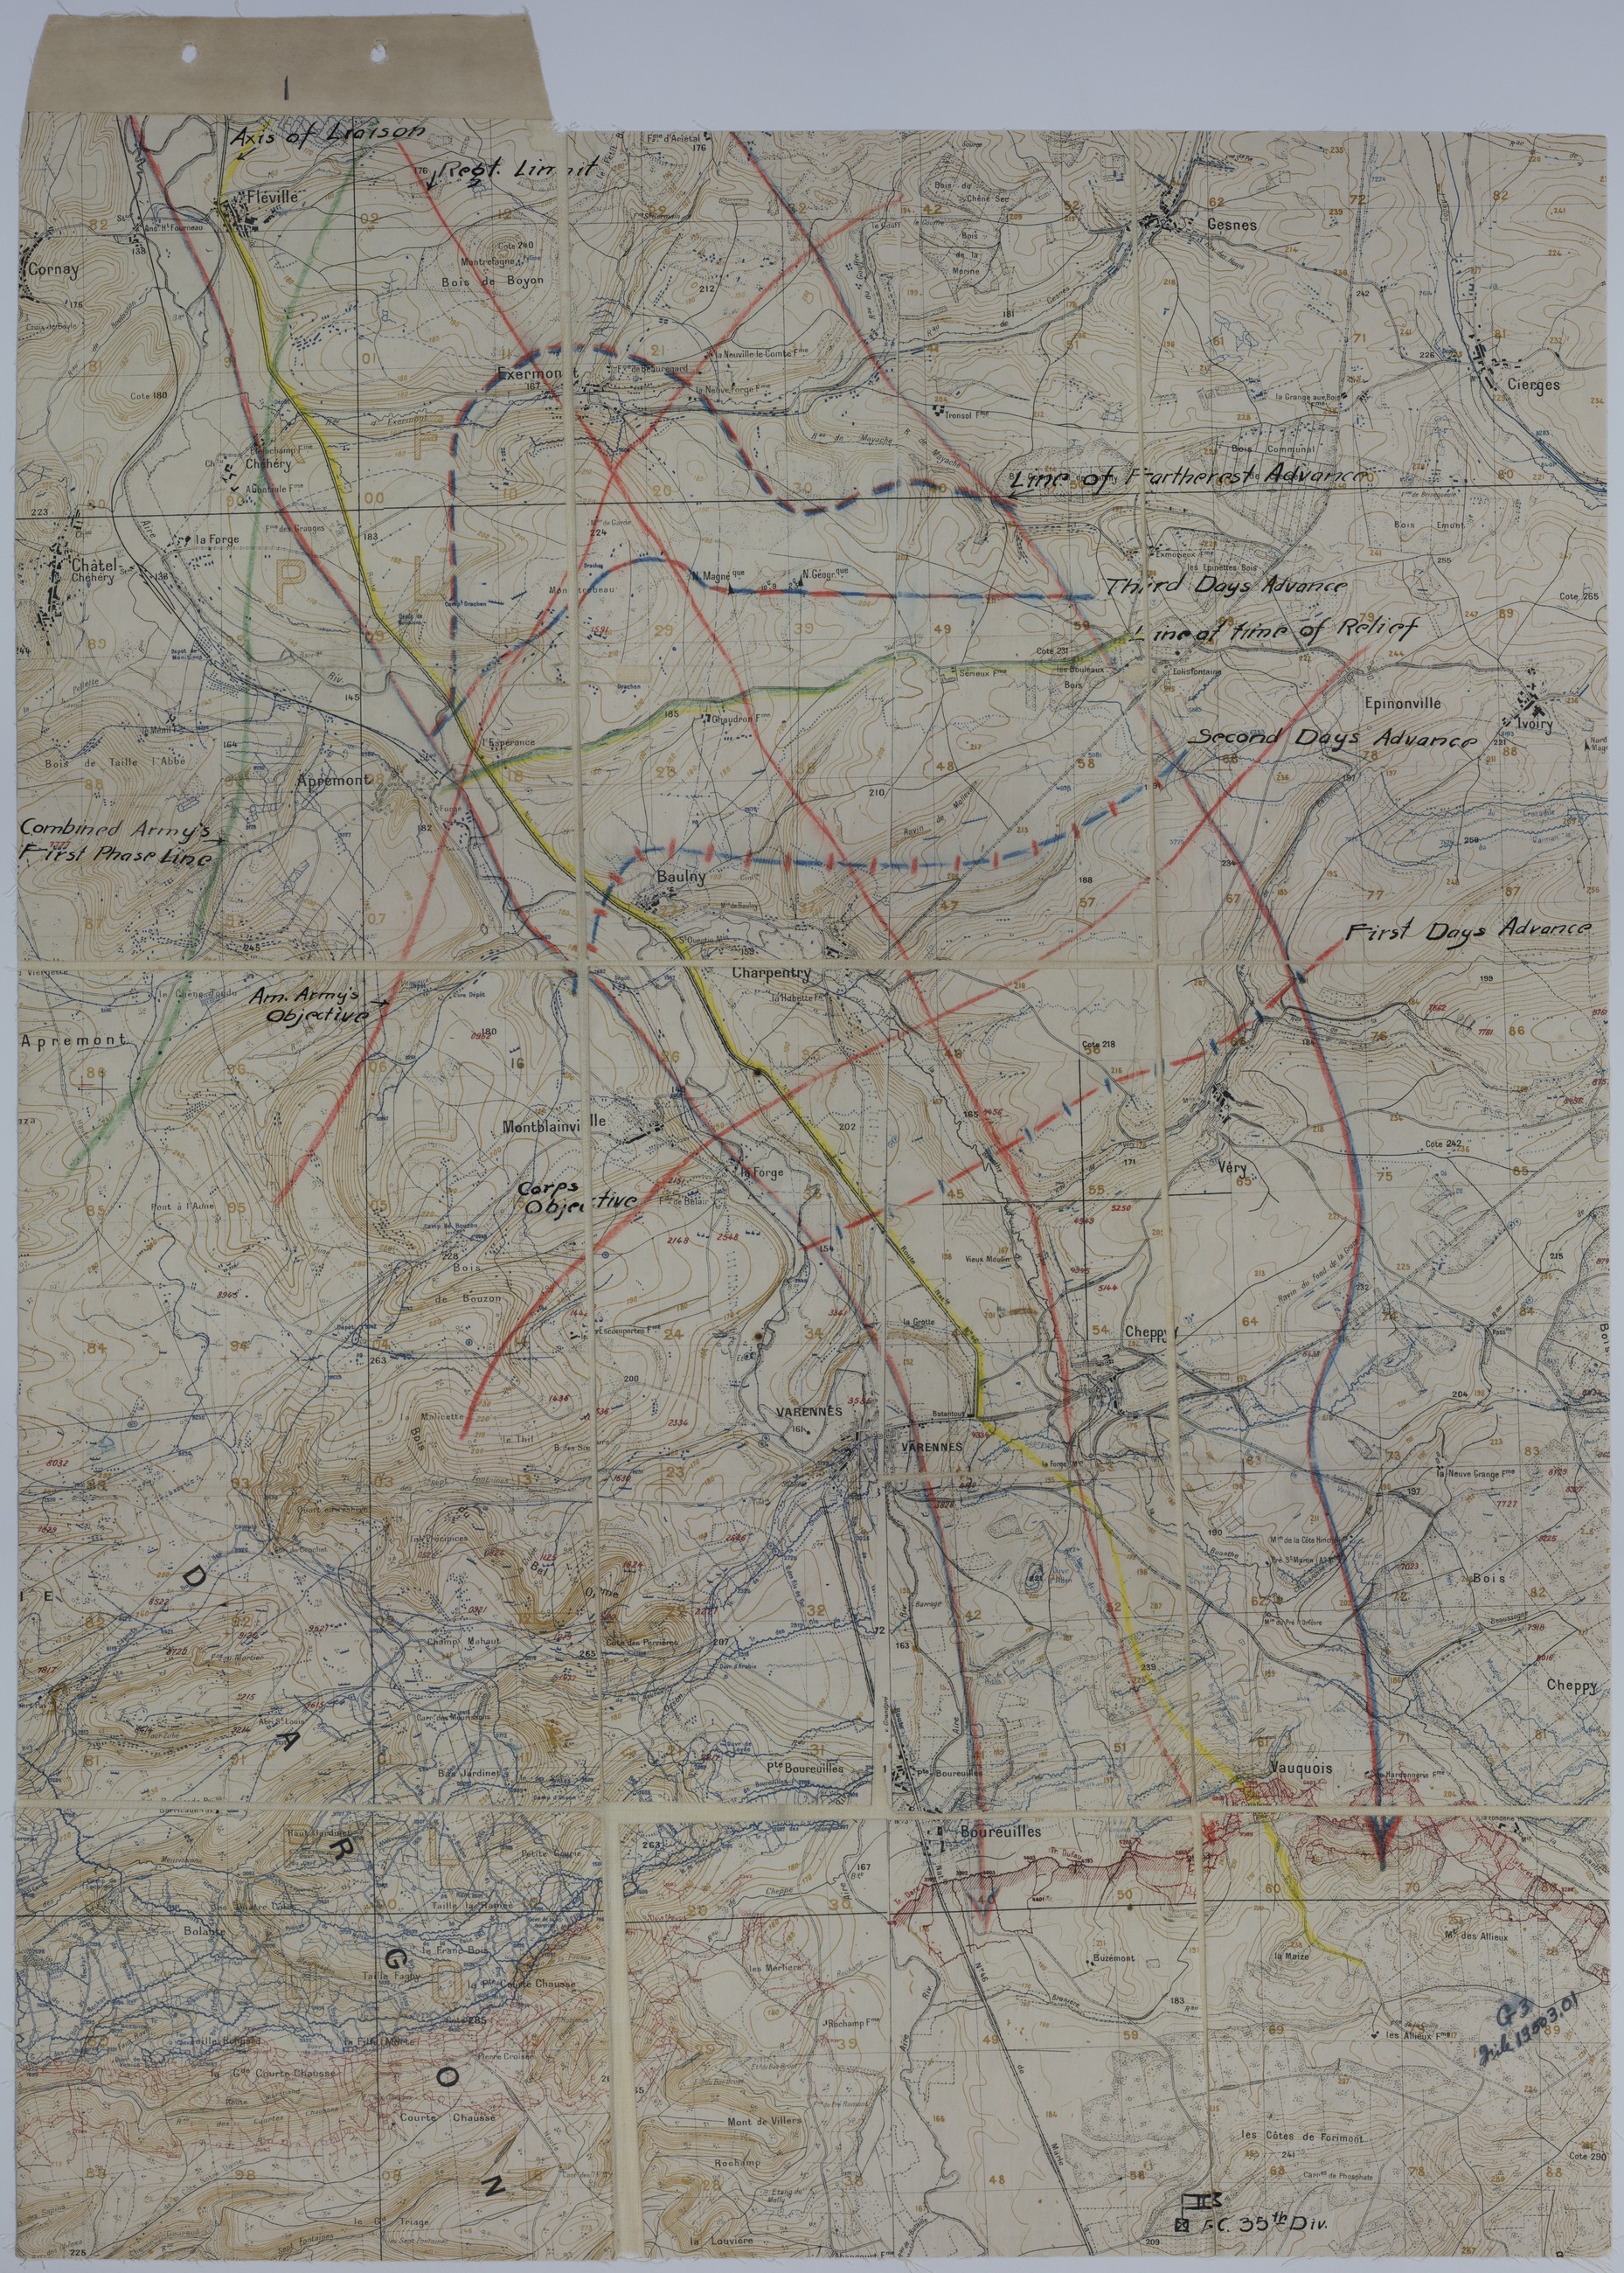 Map of American Advance During the Meuse-Argonne Offensive